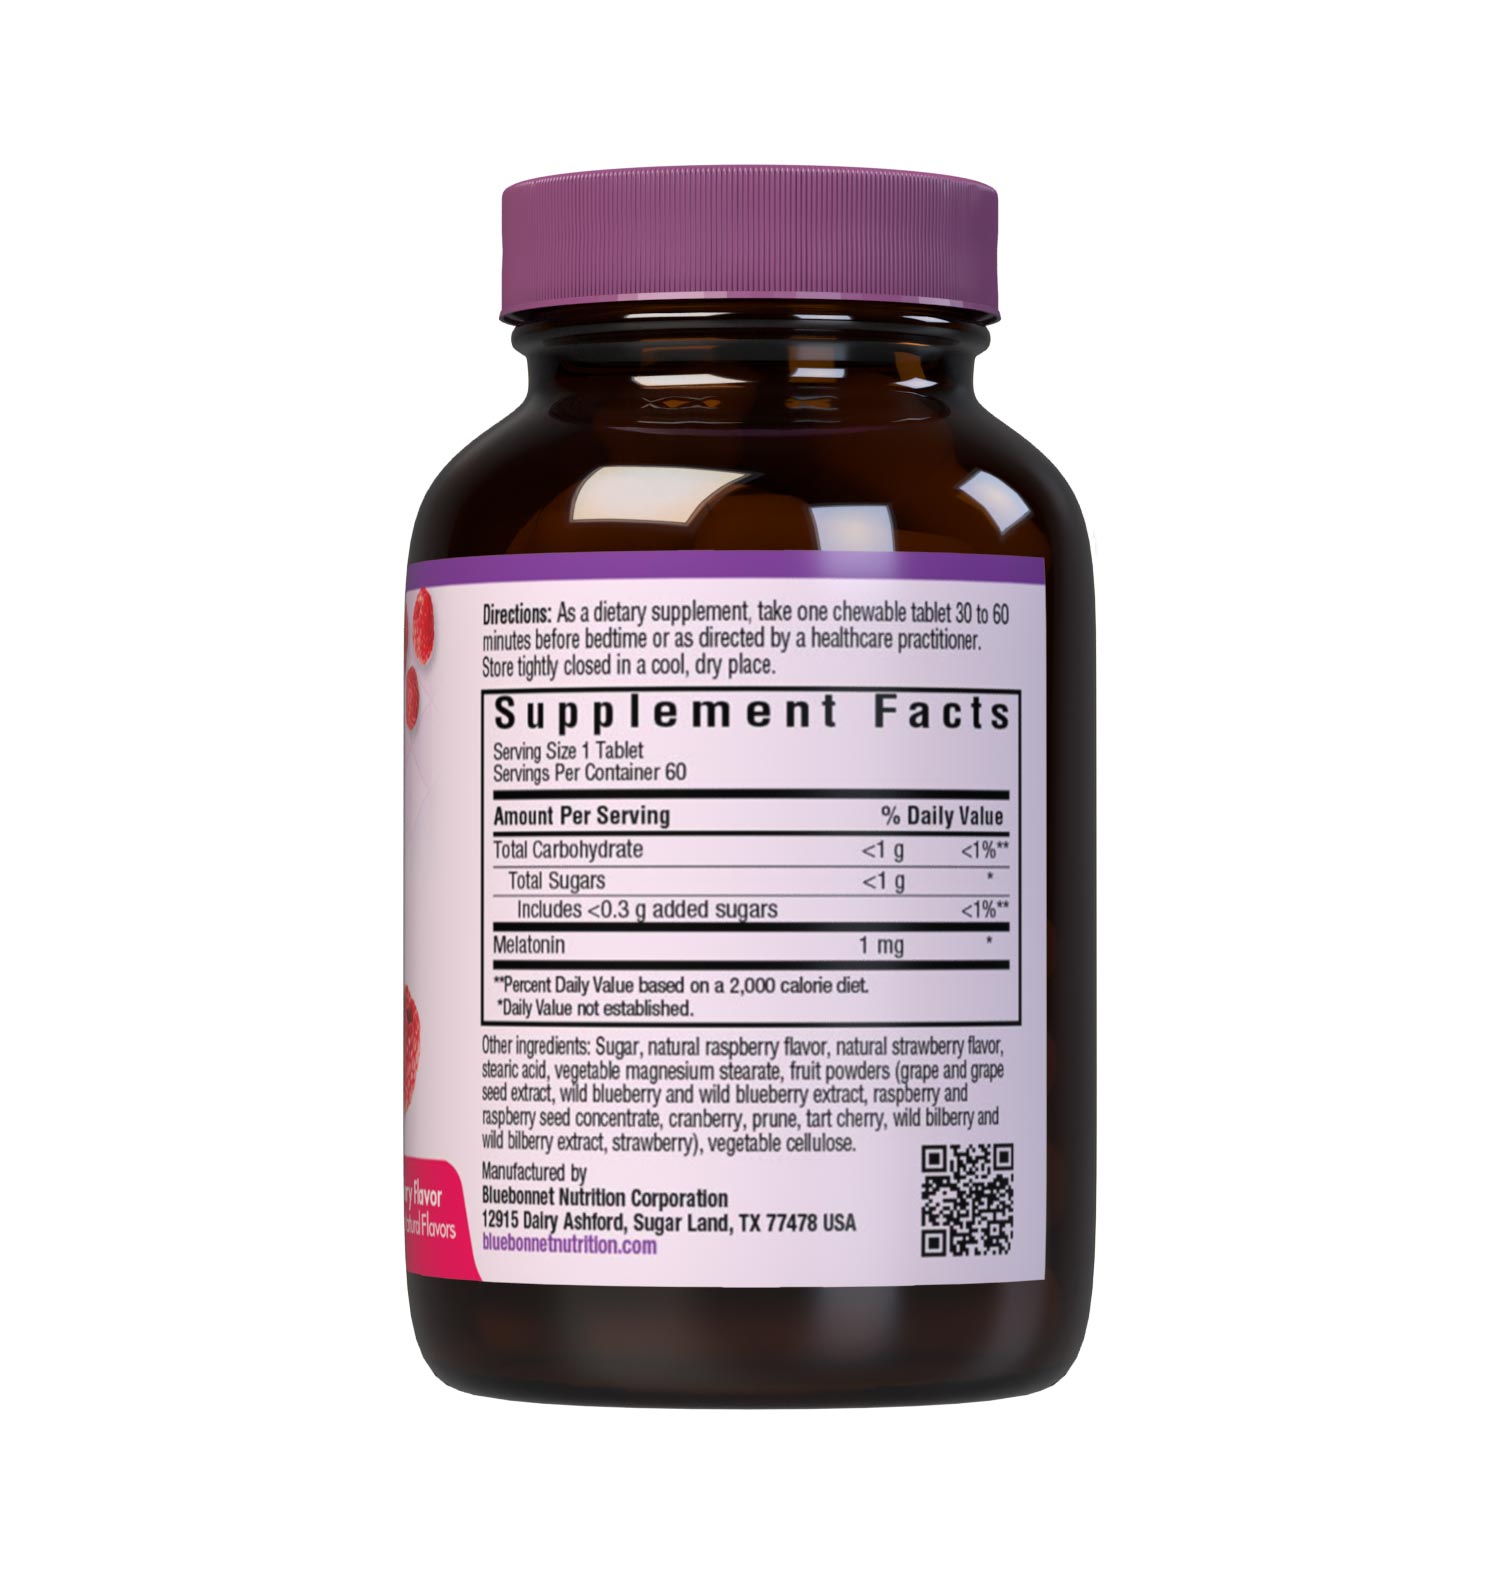 Bluebonnt's Earthsweet Chewables Melatonin 1 mg 60 tablets help to minimize occasional sleeplessness for those affected by distrubed sleep/wake cycles, such as those travelling across multiple time zones. Supplement facts panel. #size_60 count